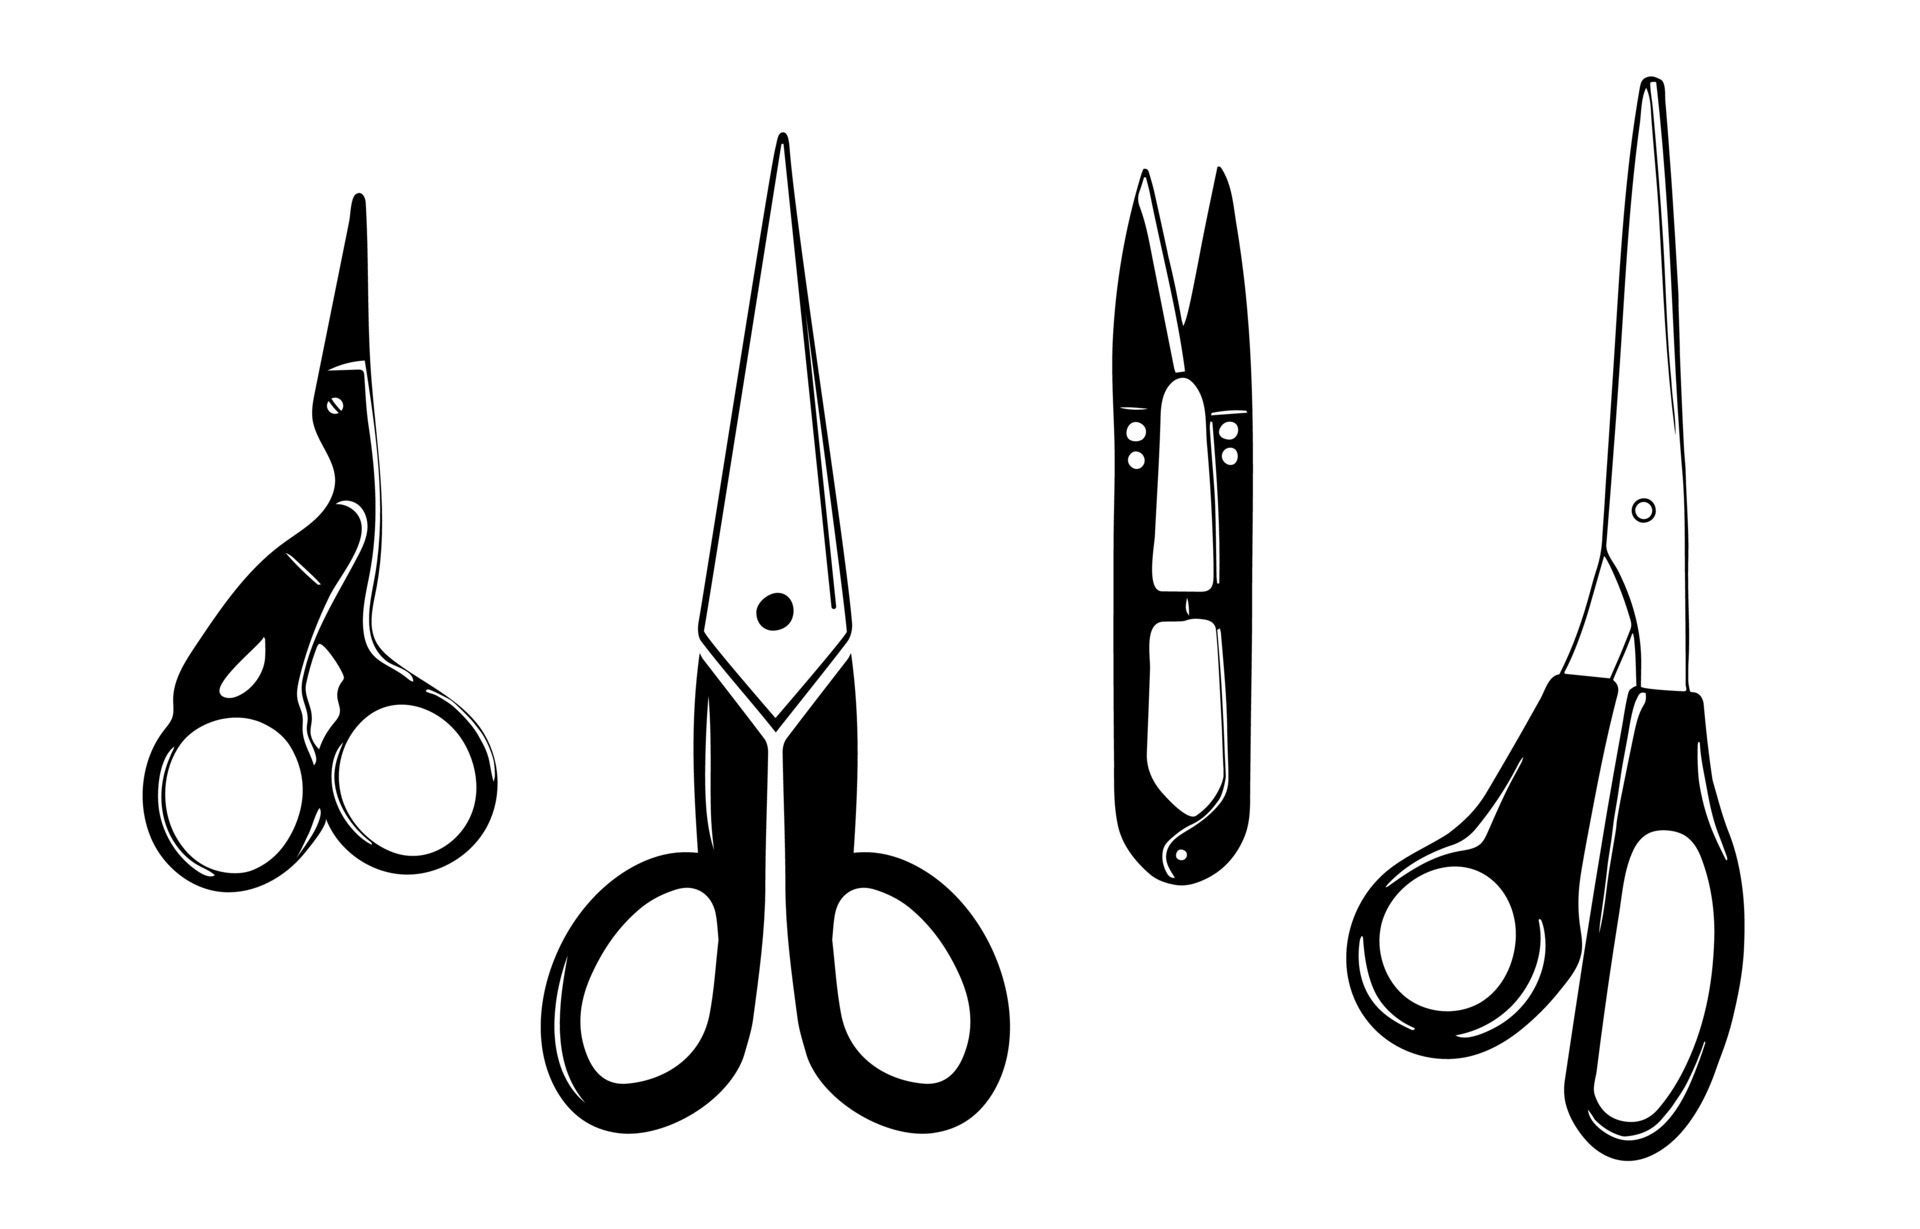 https://static.vecteezy.com/system/resources/previews/006/084/362/original/set-of-tailor-and-embroidery-scissors-crane-small-scissors-snipper-fabric-scissors-isolated-on-white-background-silhouette-vector.jpg